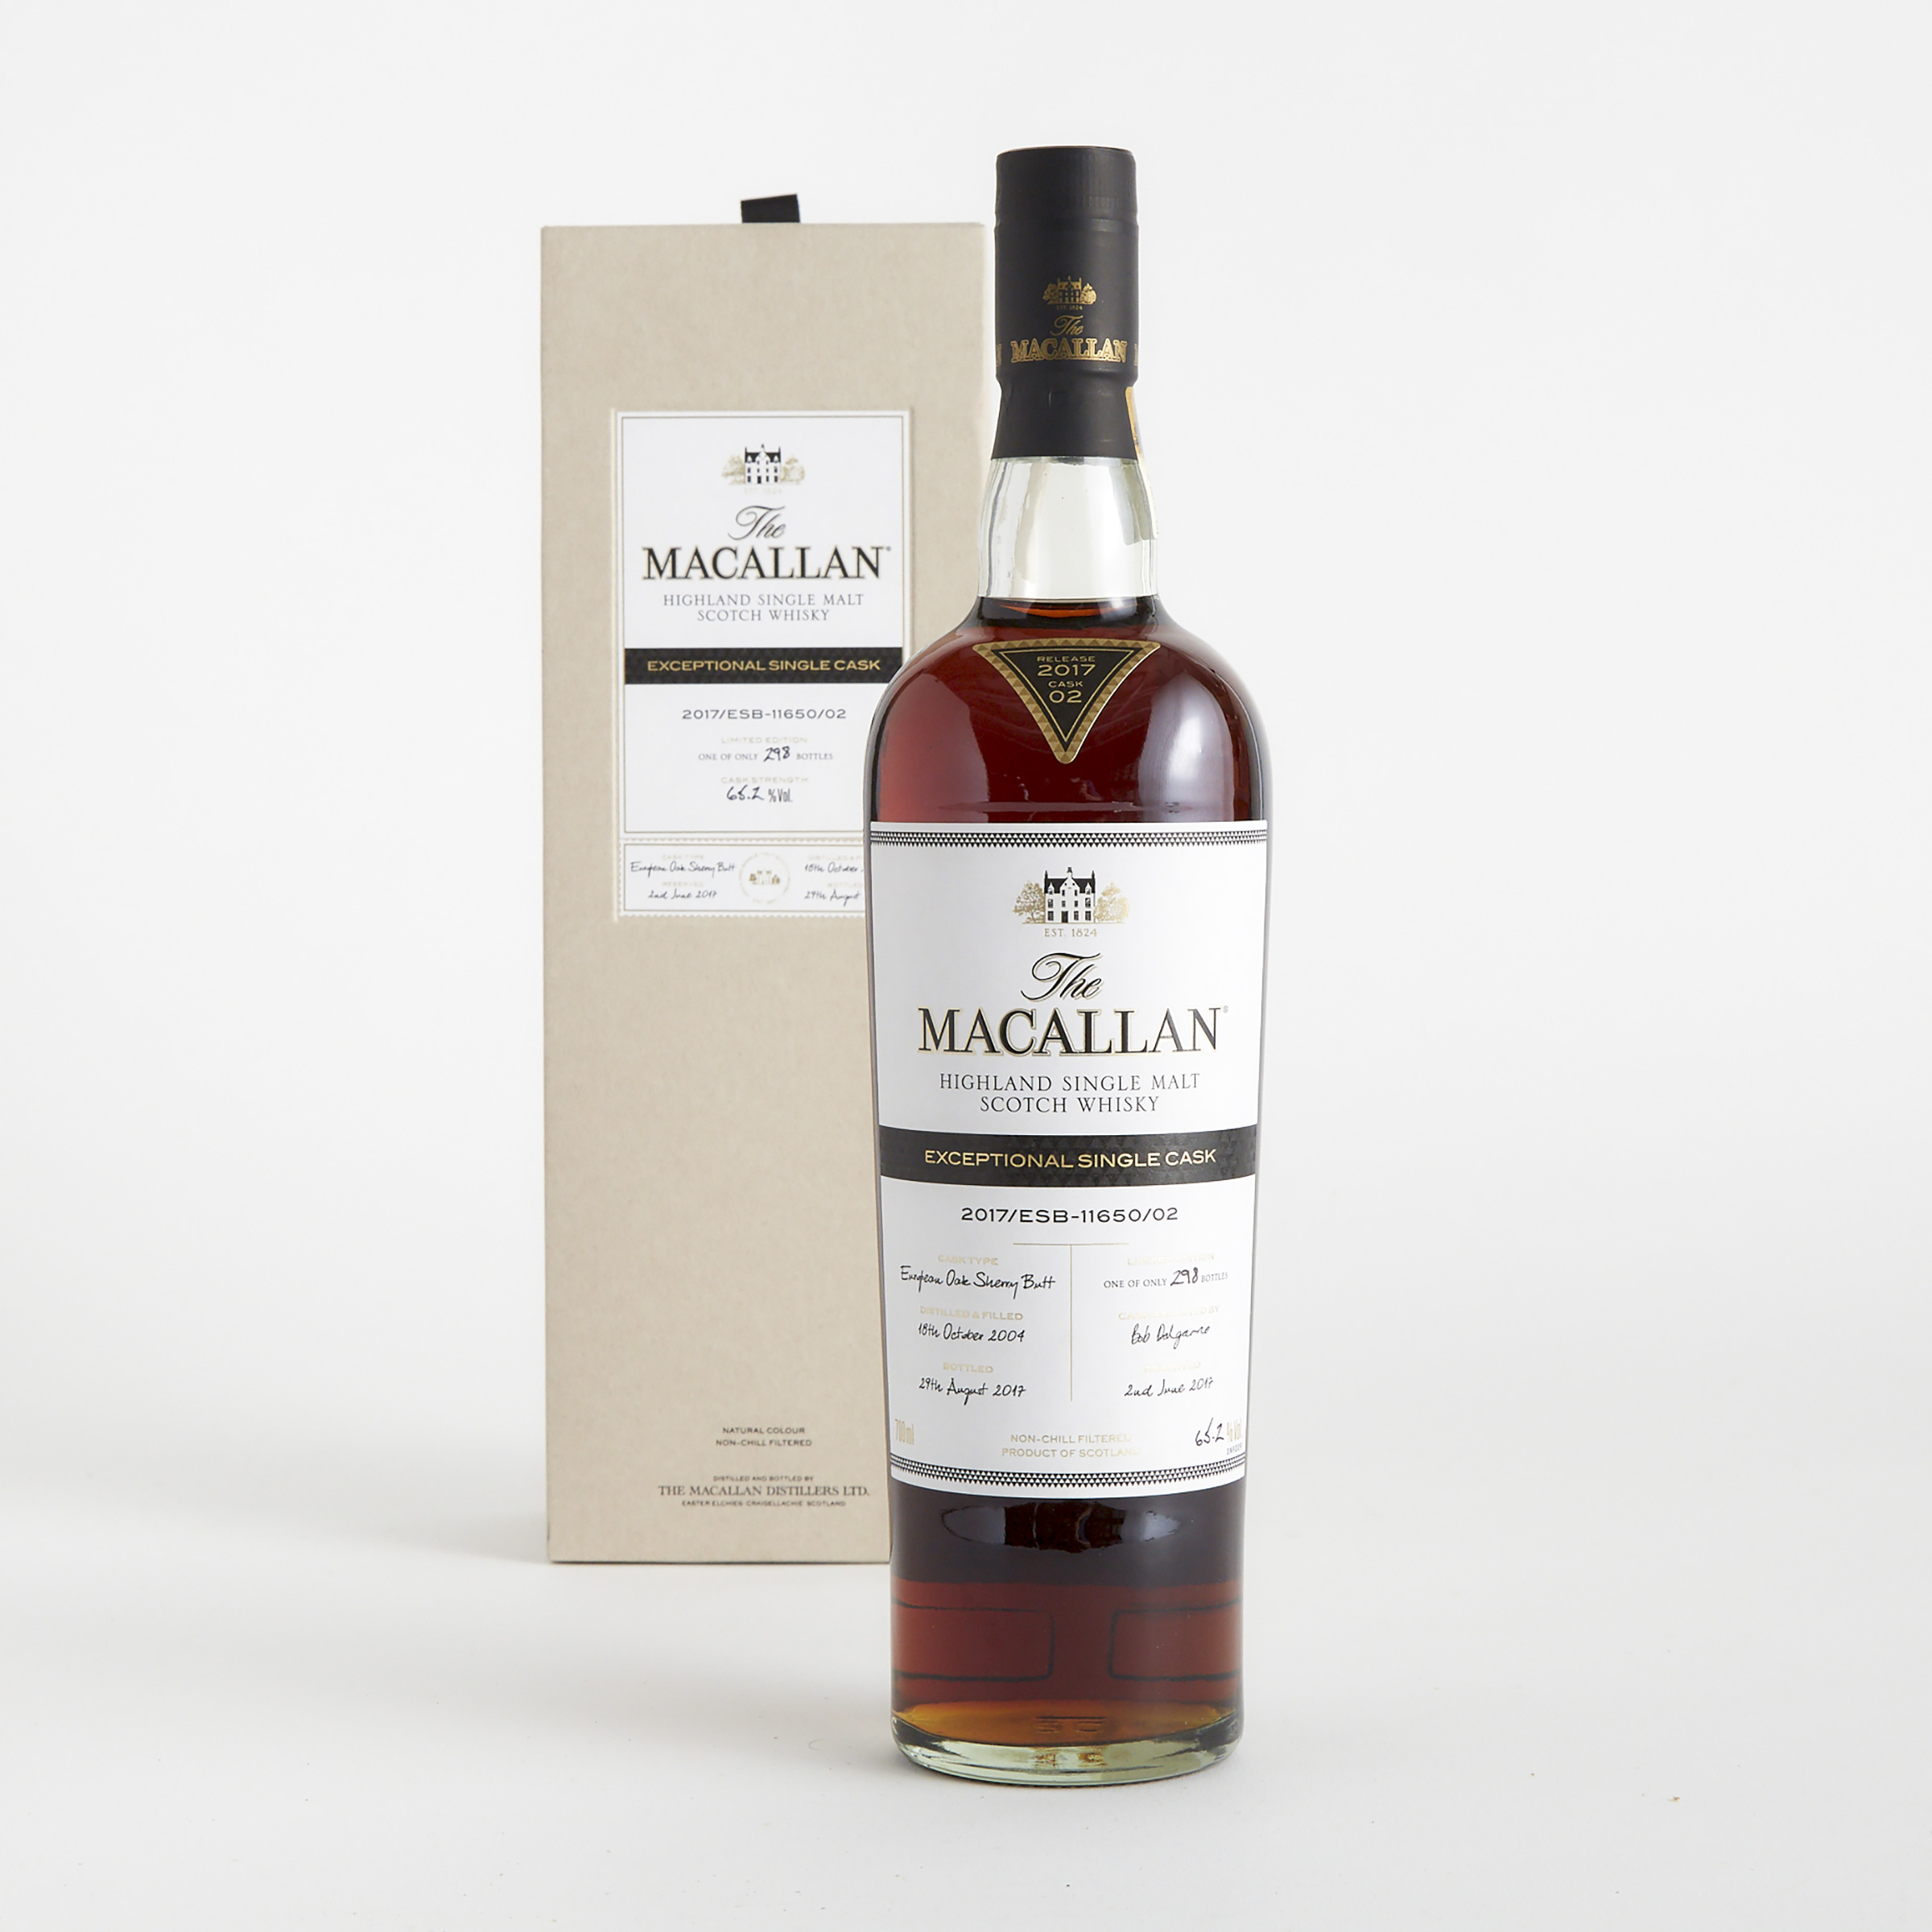 THE MACALLAN 2004 EXCEPTIONAL CASK #11650-02 HIGHLAND SINGLE MALT SCOTCH WHISKY (ONE 700 ML)